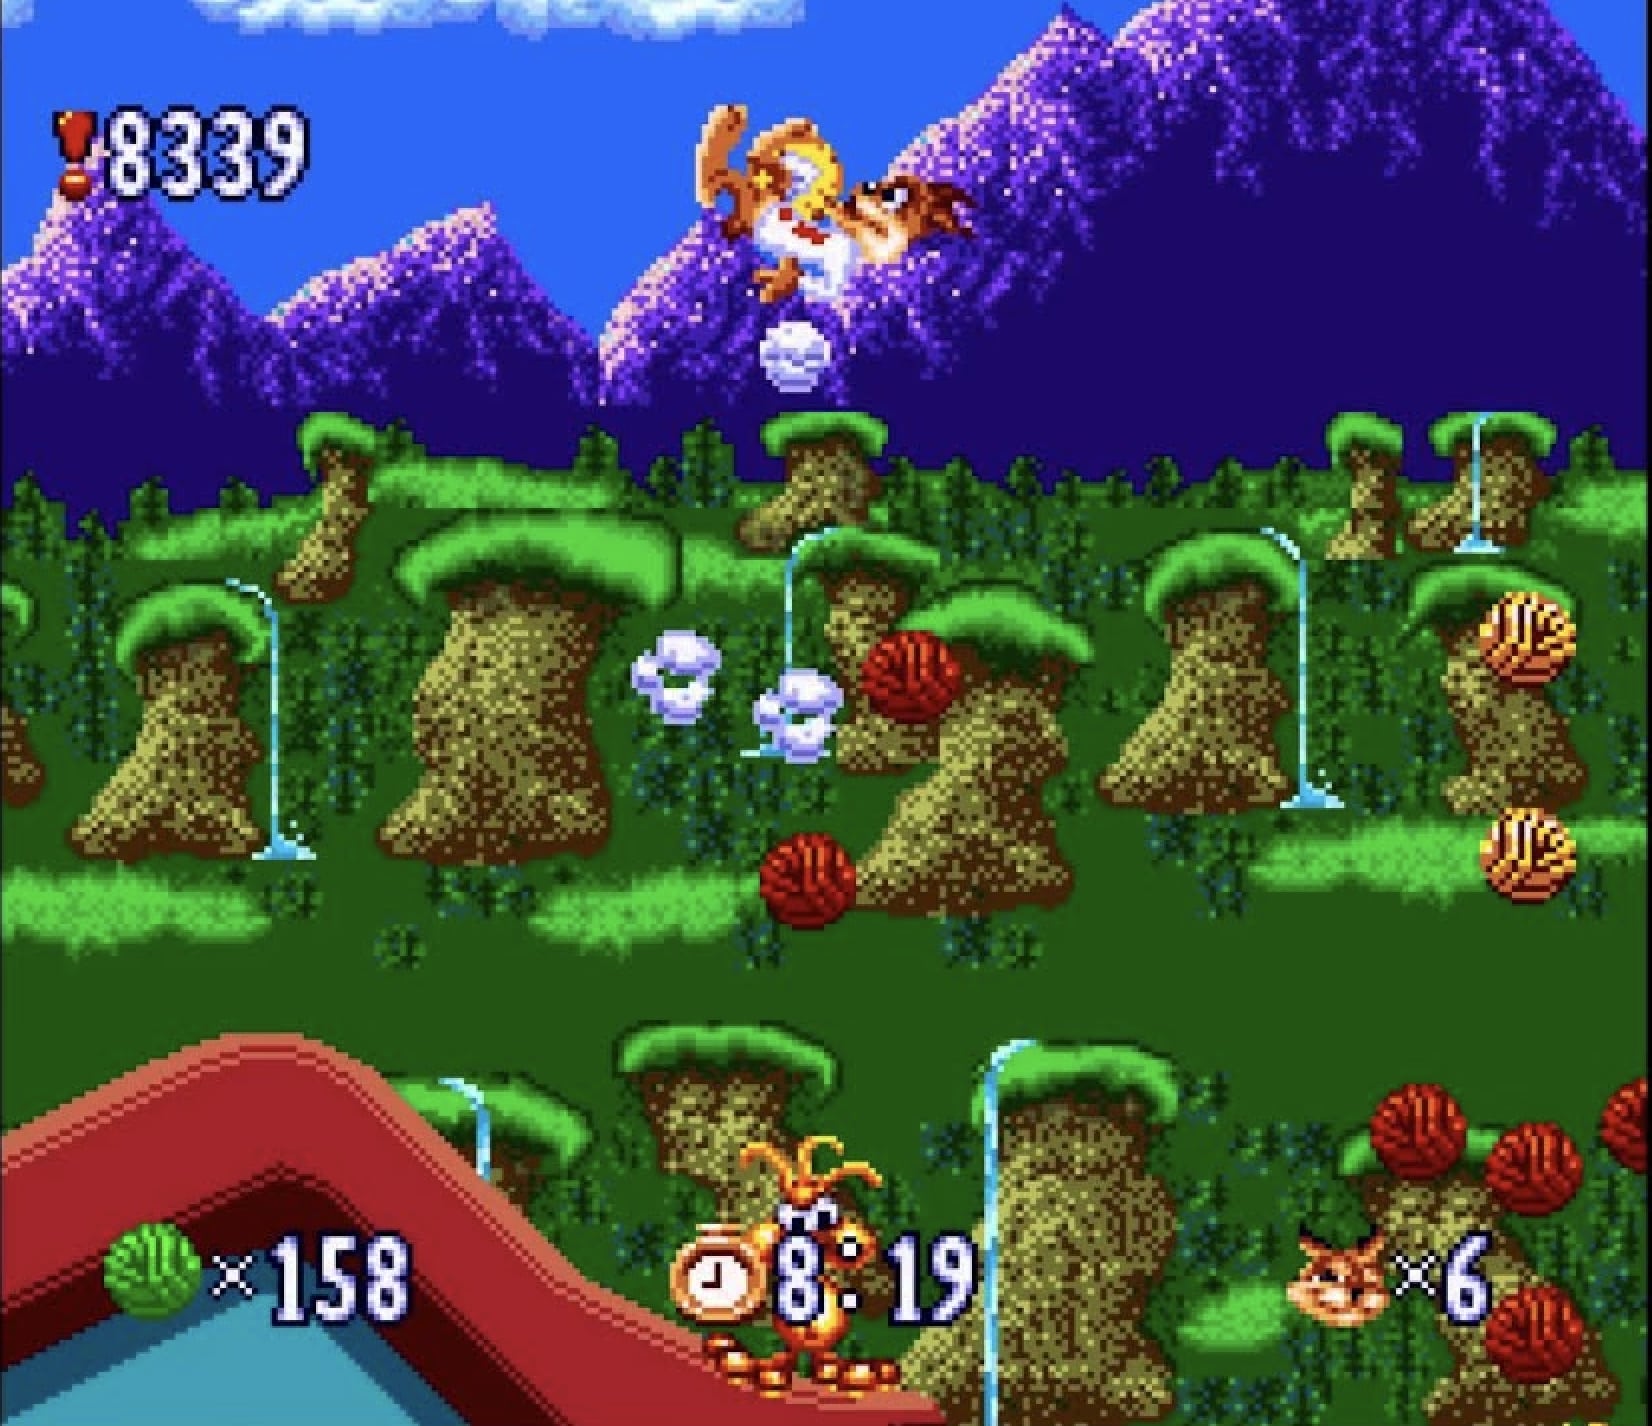 Bubsy’s gameplay finds itself somewhere between Mario and Sonic